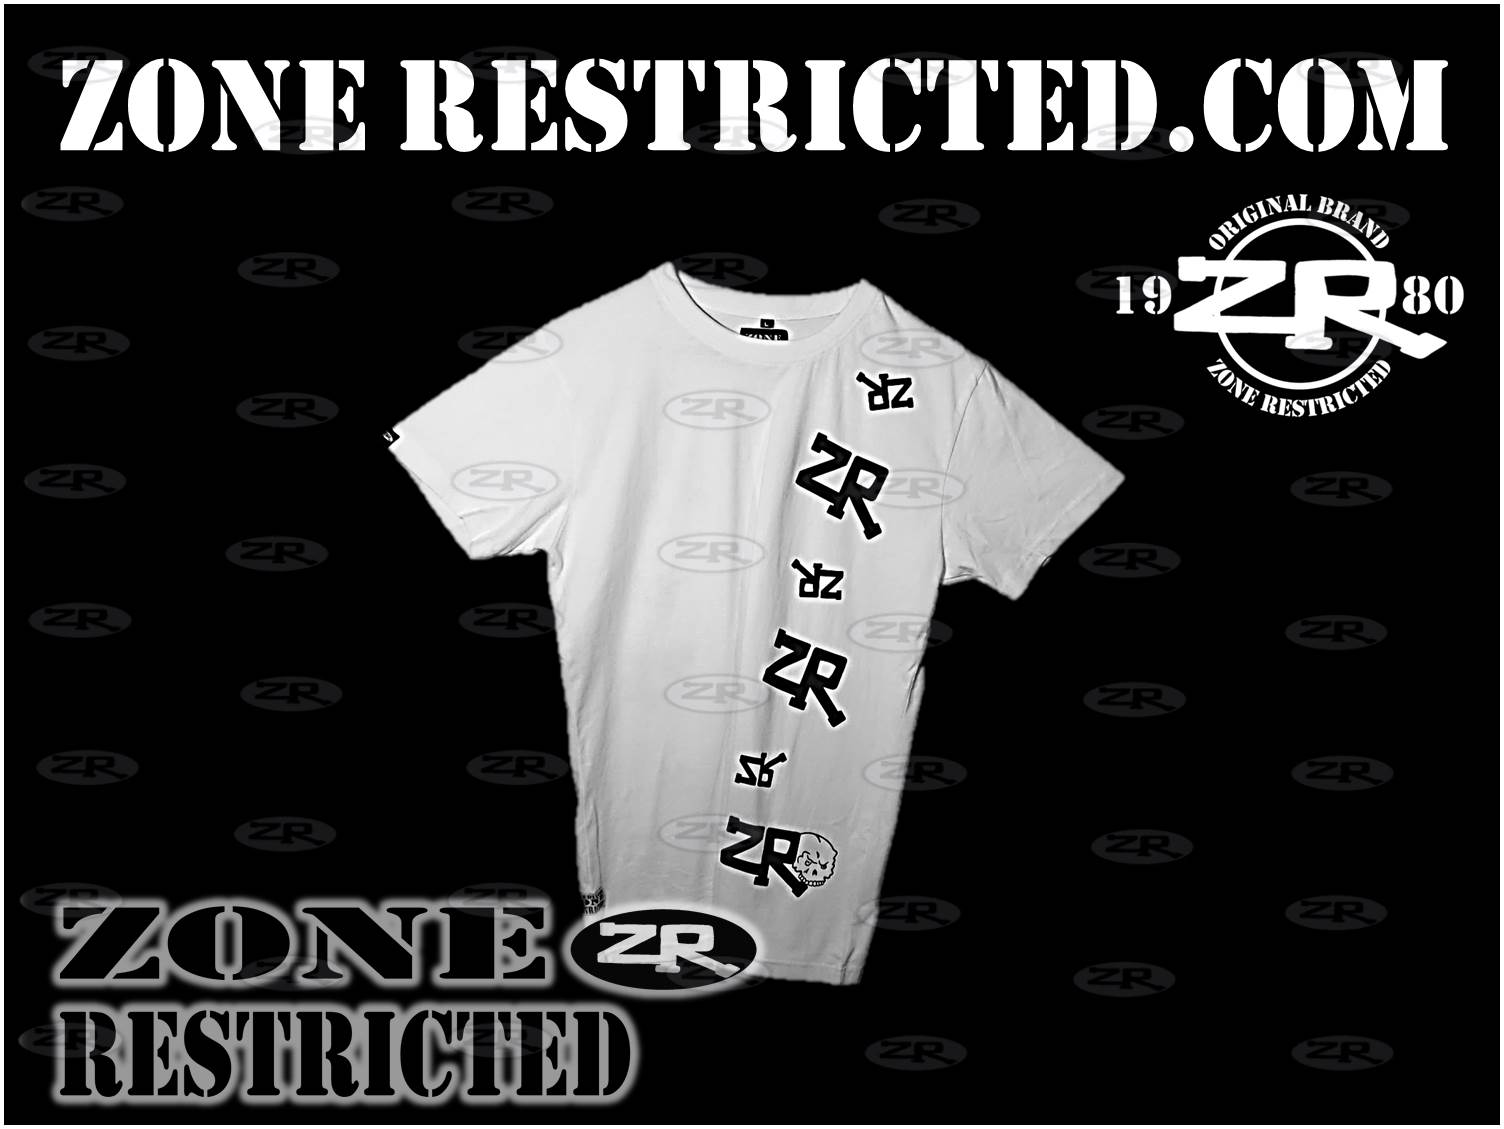 ZONE RESTRICTED